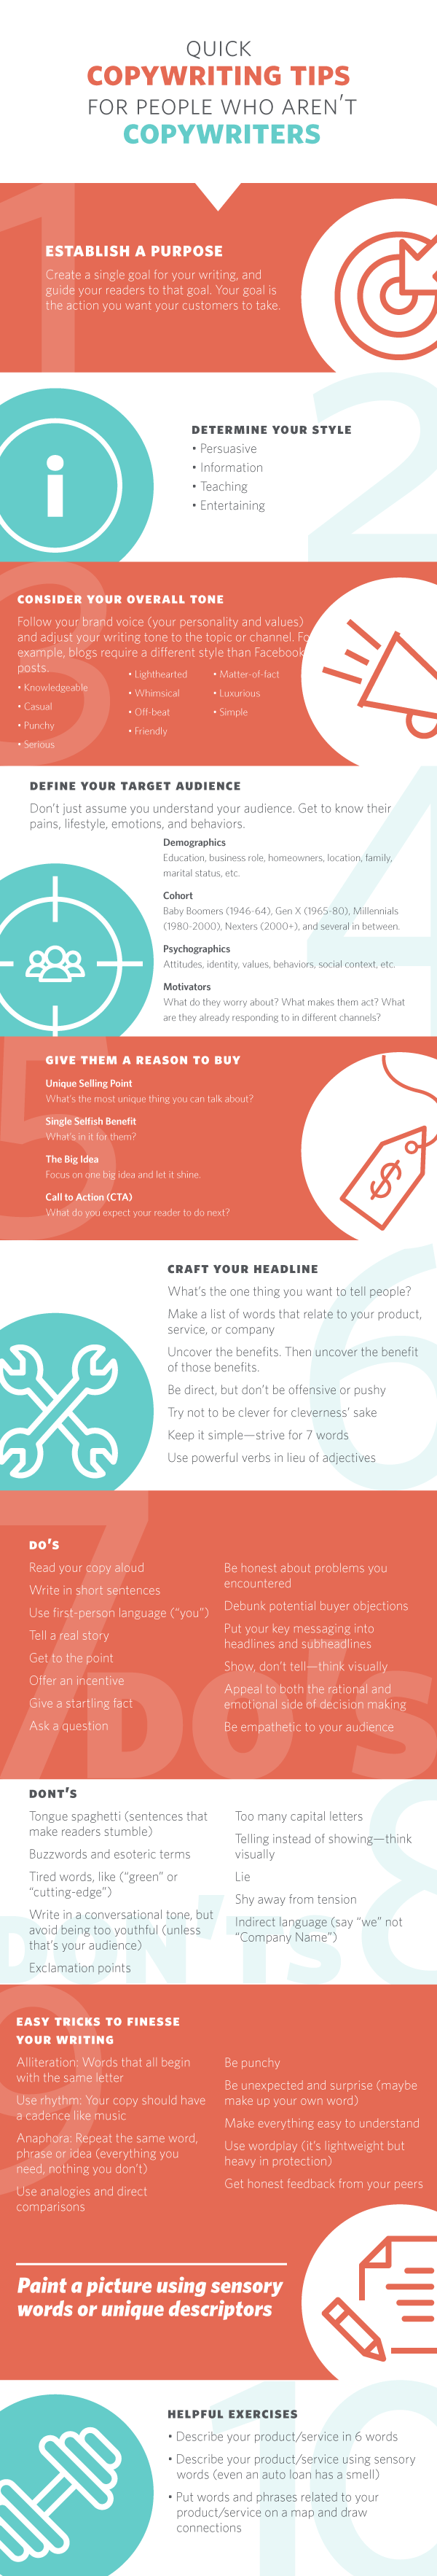 [Infographic] Copywriting Tips for People Who Are Not Copywriters